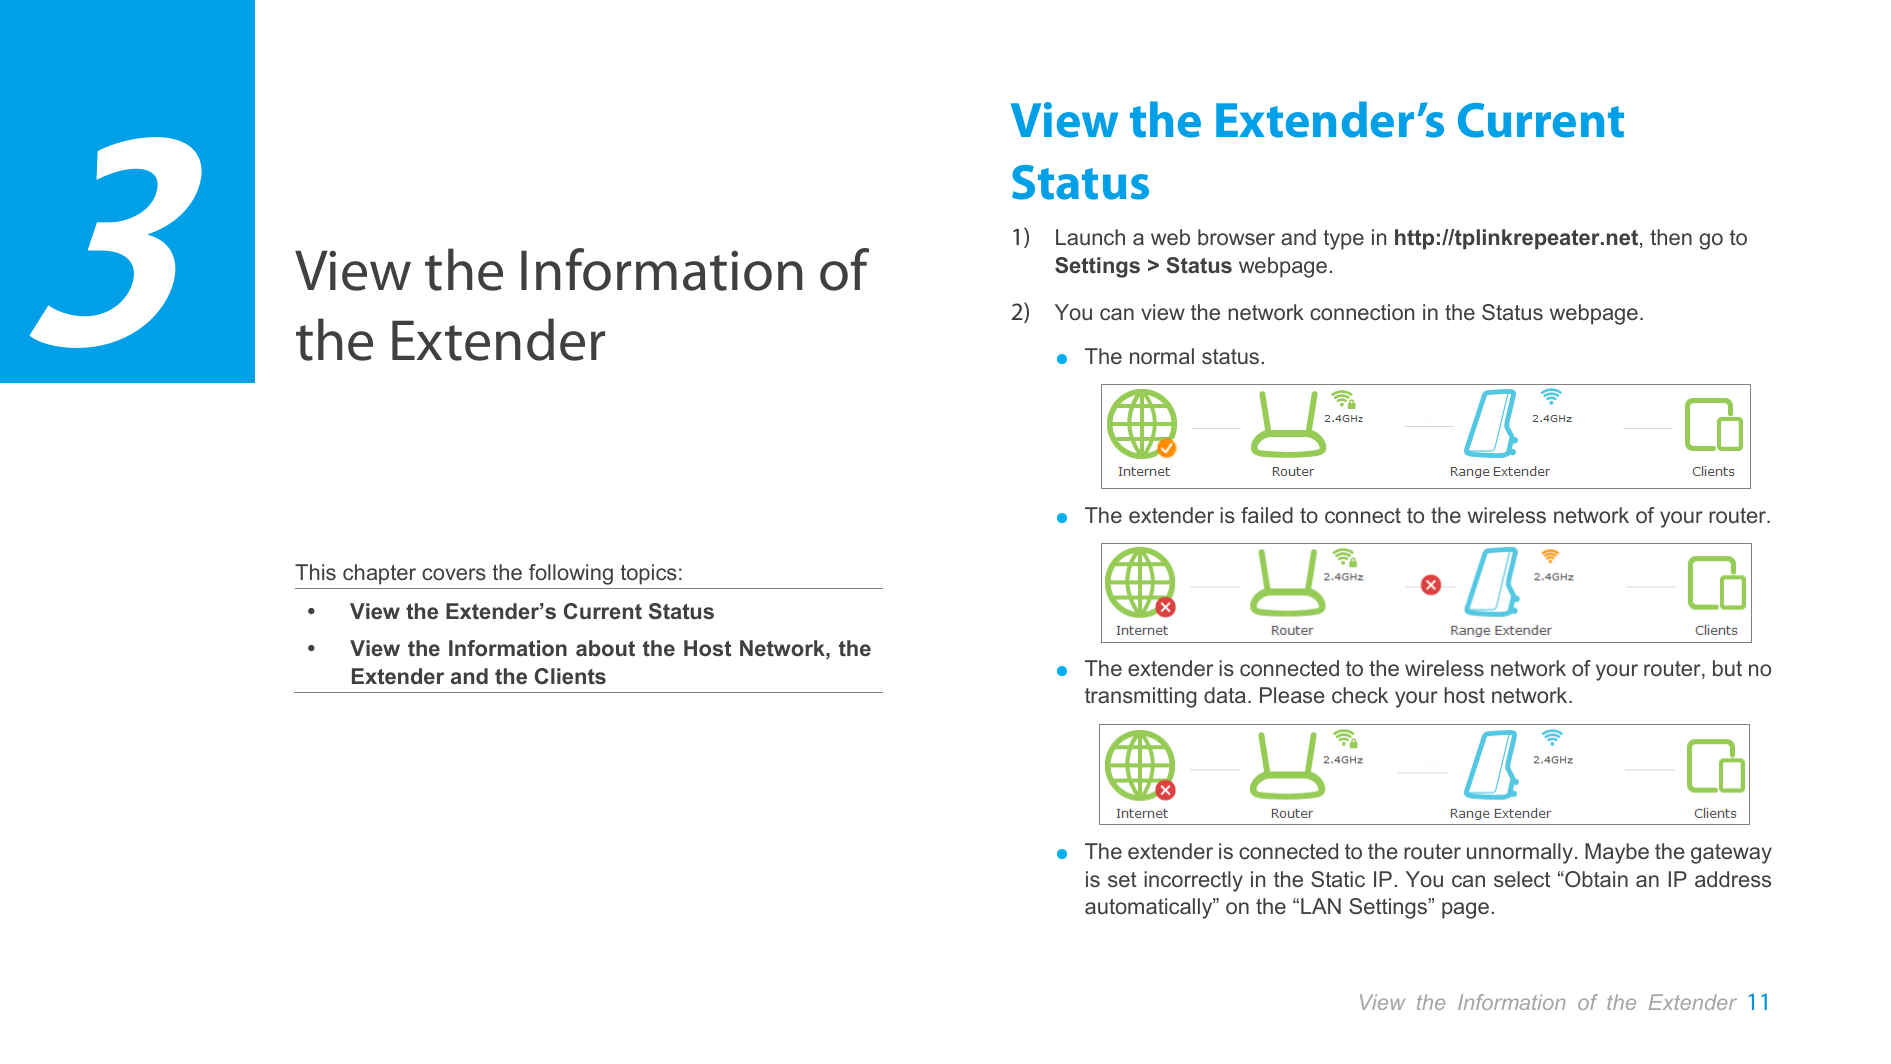  View the Information of the Extender       This chapter covers the following topics:  View the Extender’s Current Status  View the Information about the Host Network, the Extender and the Clients View the Extender’s Current Status 1) Launch a web browser and type in http://tplinkrepeater.net, then go to Settings &gt; Status webpage. 2) You can view the network connection in the Status webpage. ● The normal status.  ● The extender is failed to connect to the wireless network of your router.  ● The extender is connected to the wireless network of your router, but no transmitting data. Please check your host network.     ● The extender is connected to the router unnormally. Maybe the gateway is set incorrectly in the Static IP. You can select “Obtain an IP address automatically” on the “LAN Settings” page. 3 View the Information of the Extender 11  